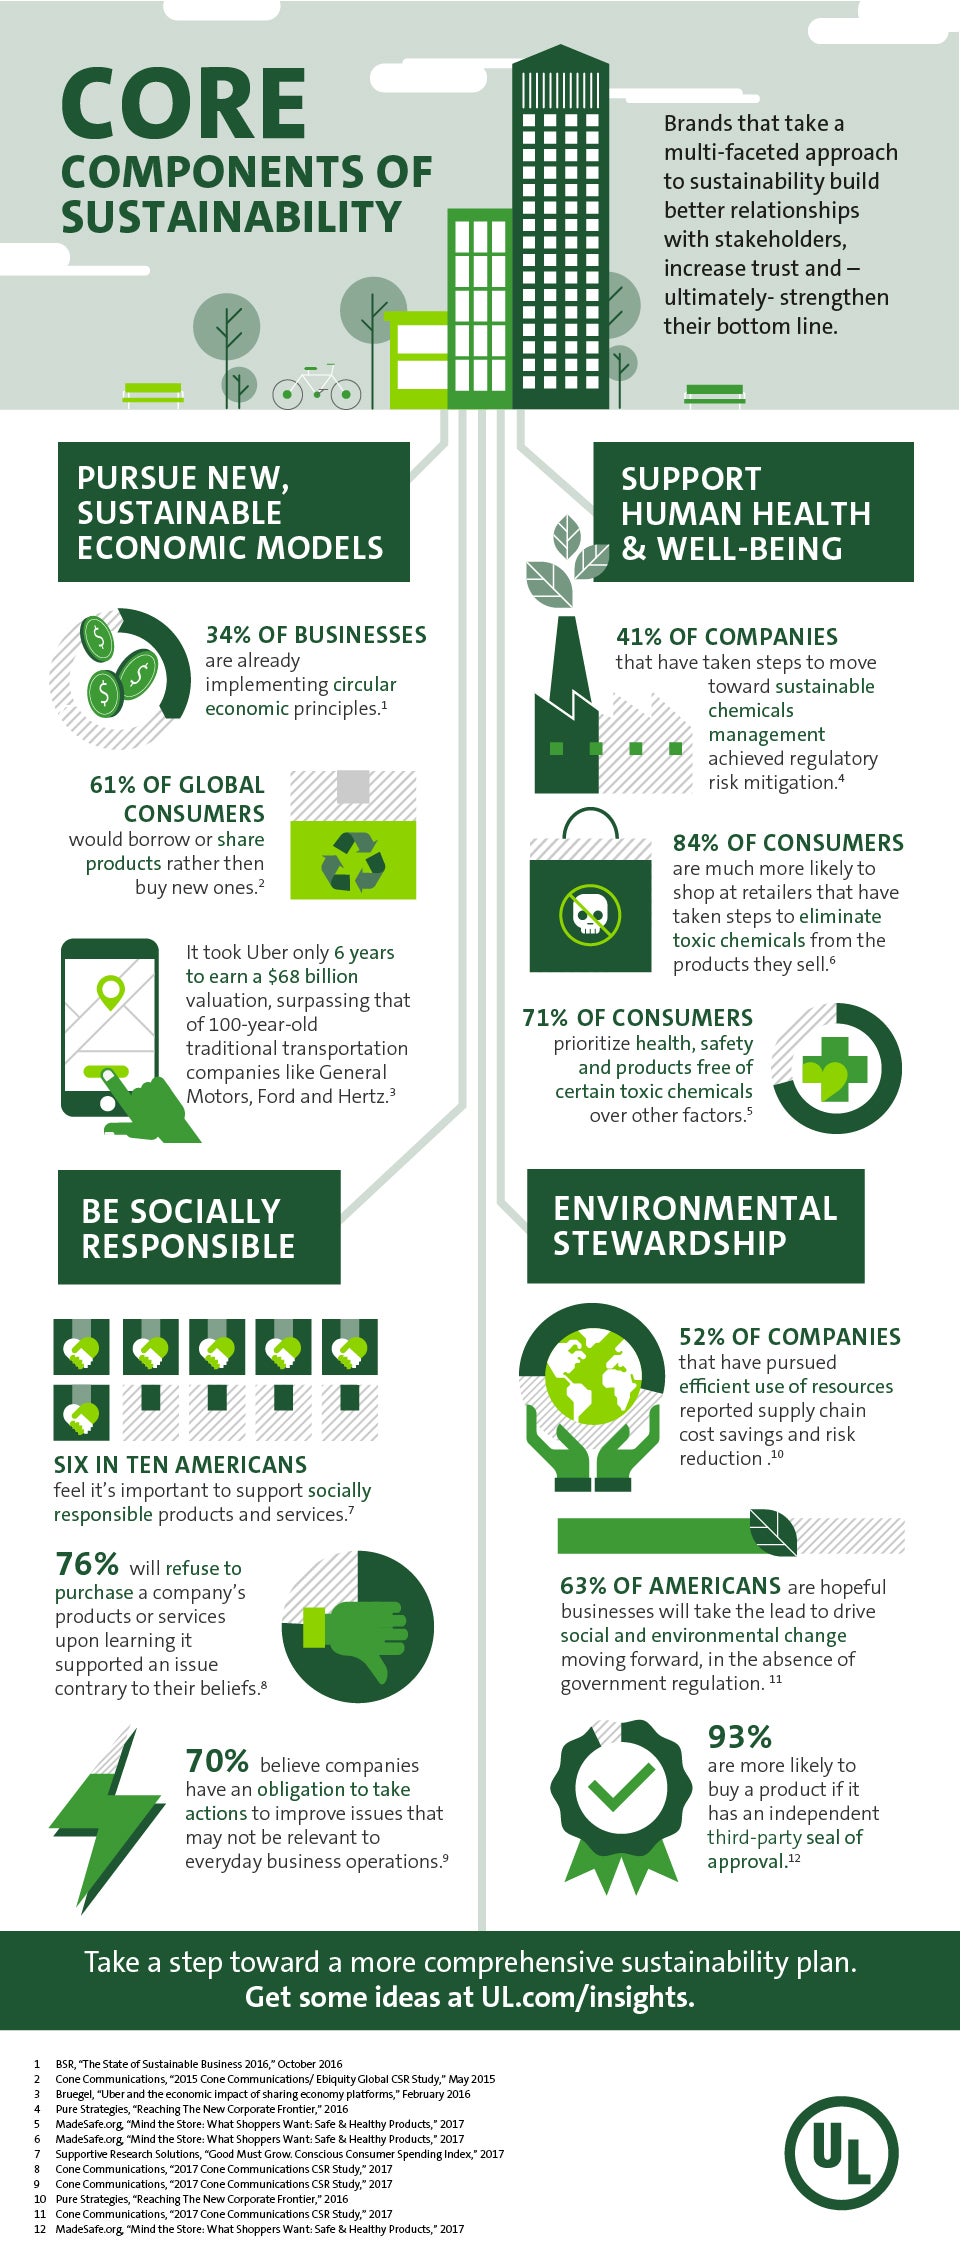 Core components of sustainability